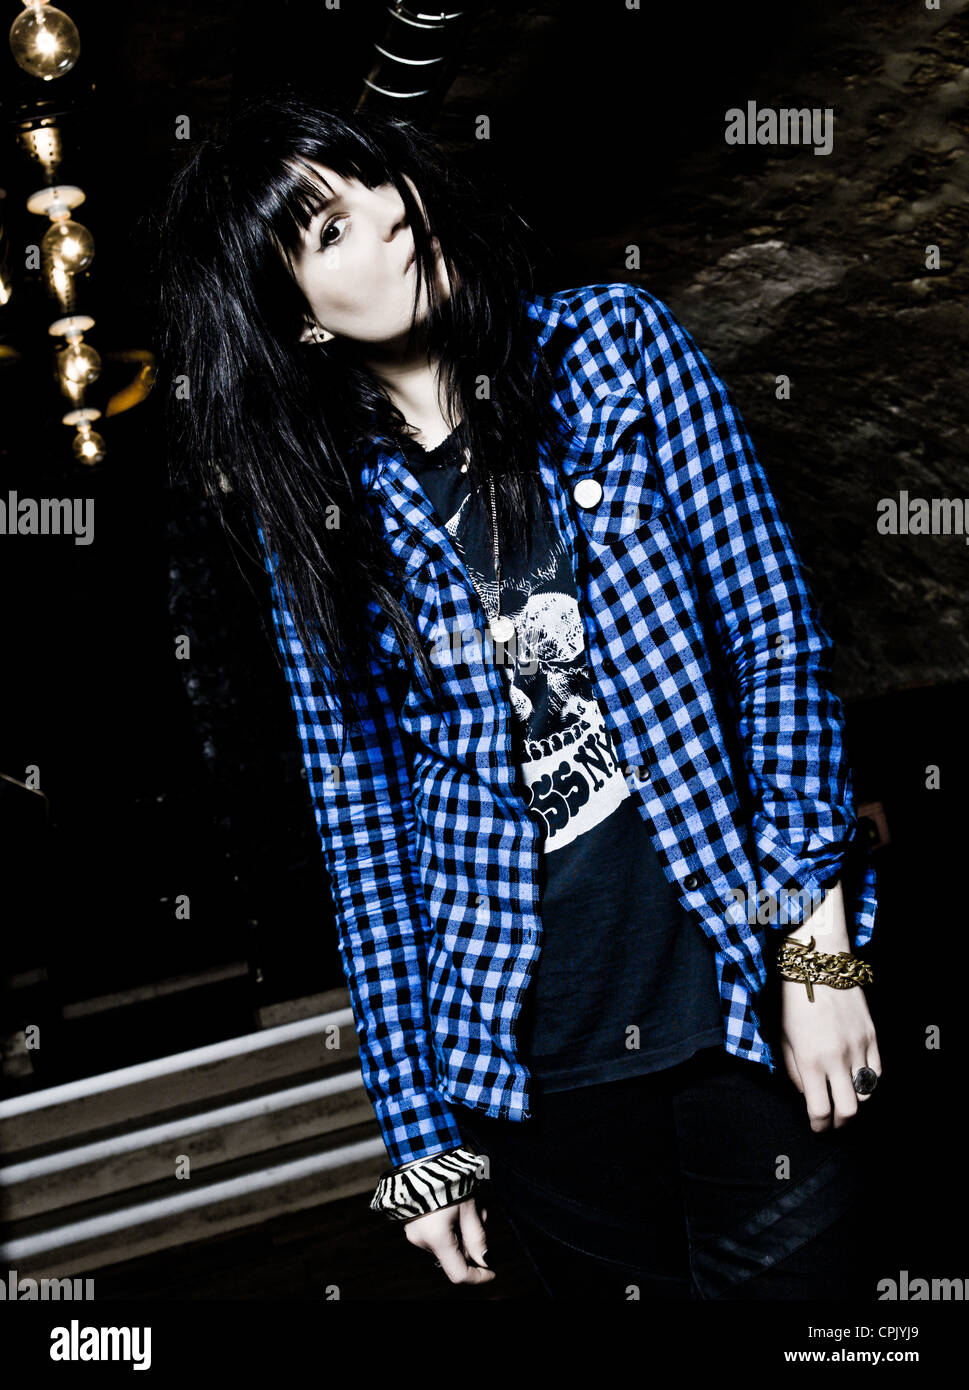 Paris, France - February 07, 2011: Portrait of the american indie rock group The Kills singer Alison Mosshart at Paris, France on february 7th, 2011 Stock Photo